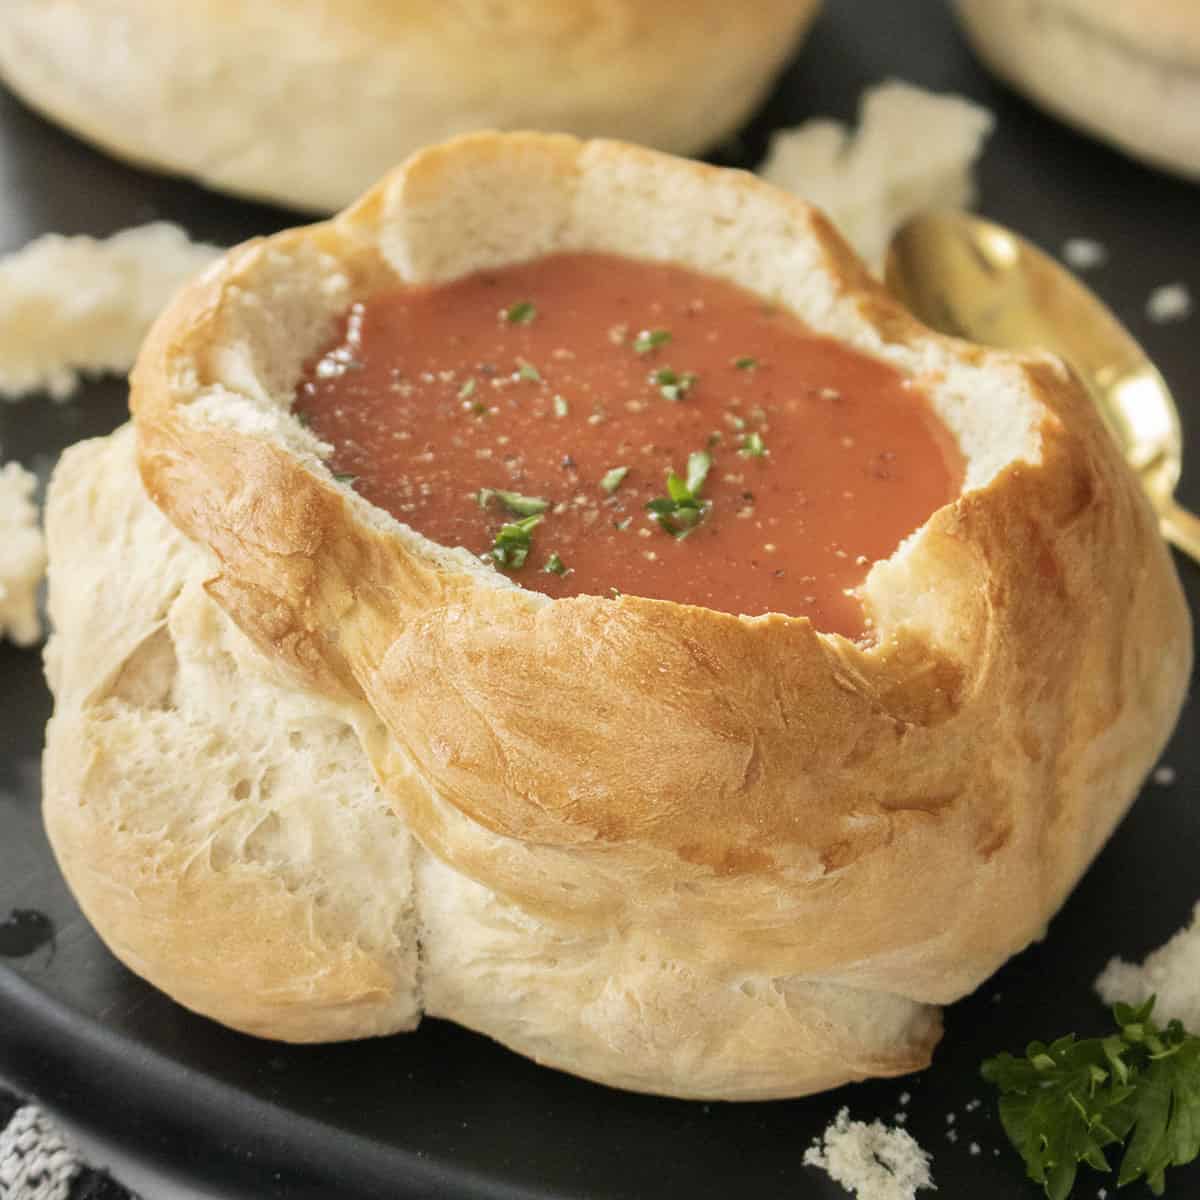 Bread bowl with tomato soup